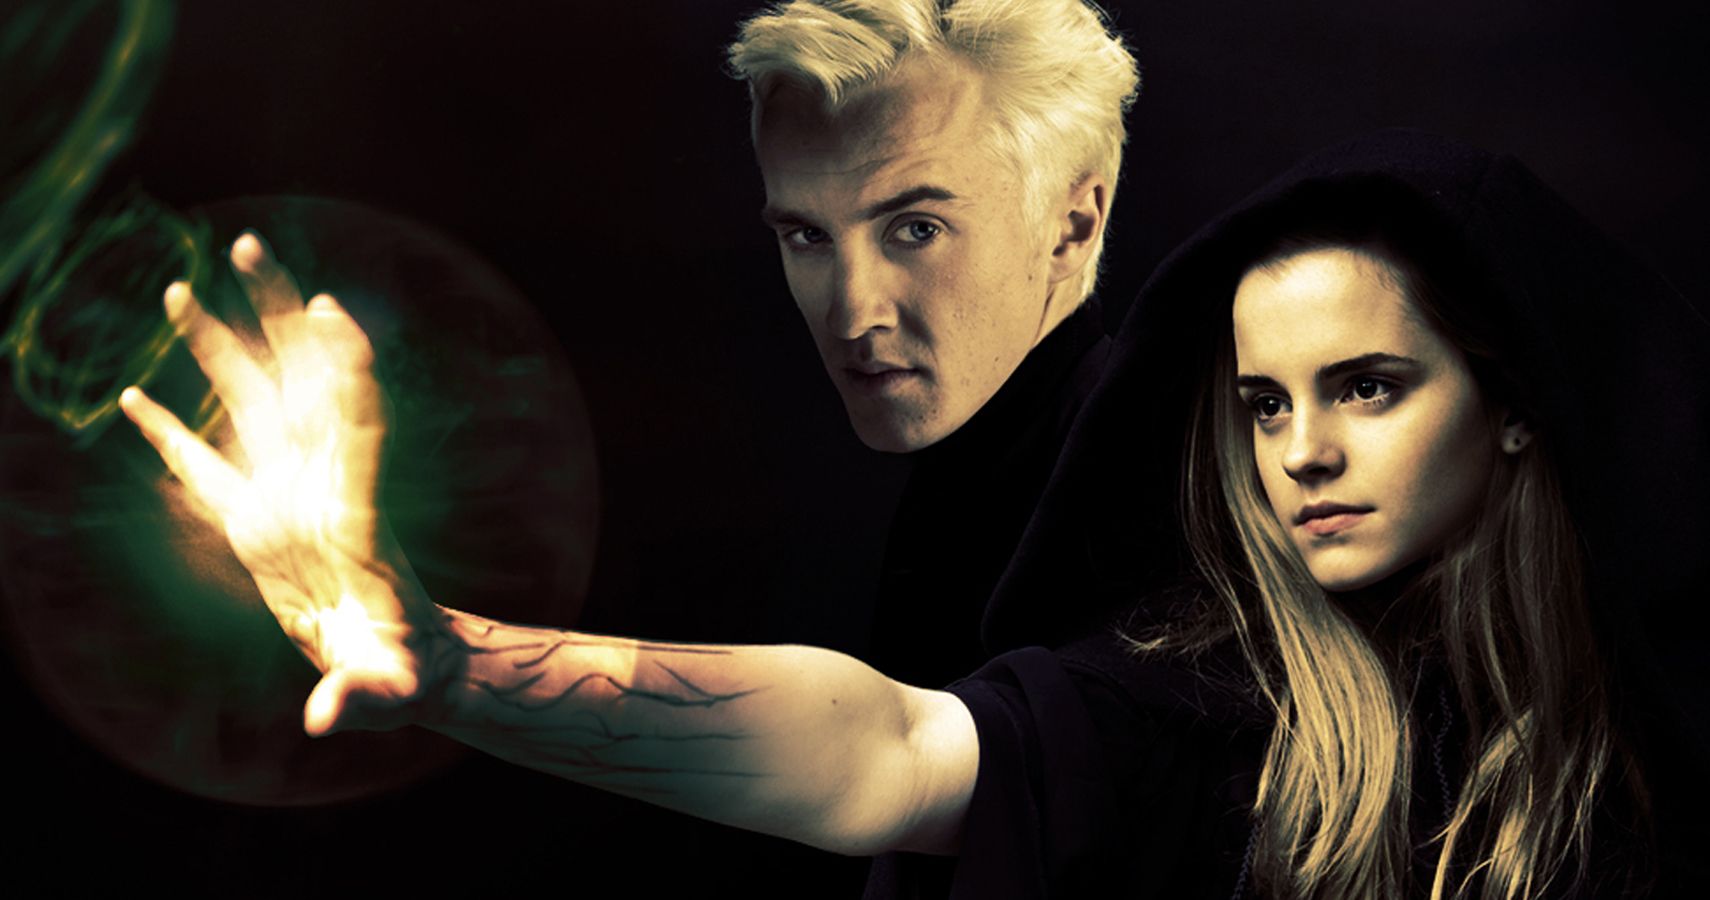 Why Draco Malfoy wasn't a typical villain